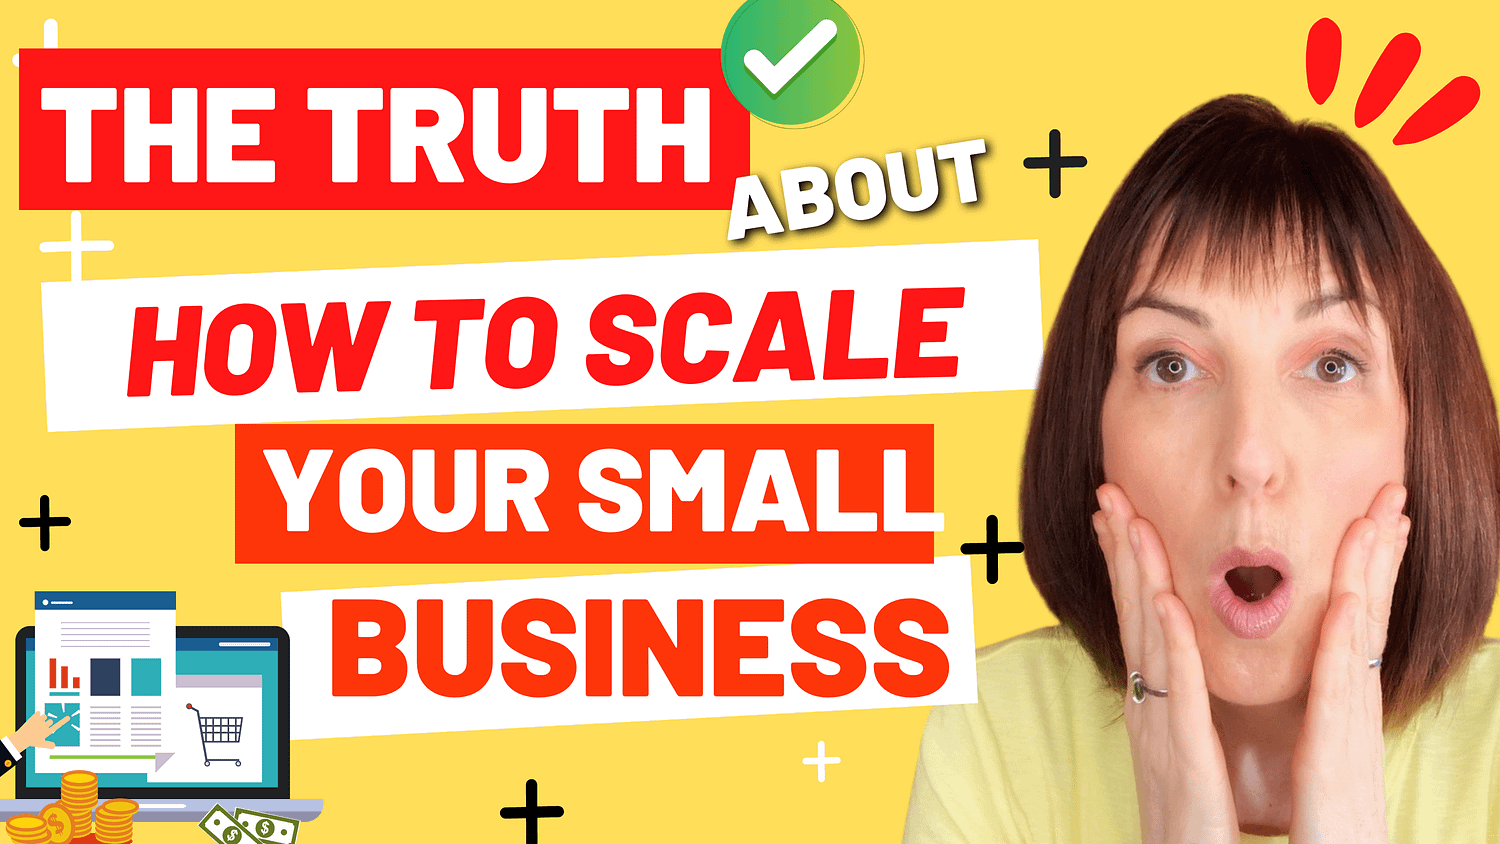 The Truth About How To Scale Your Small Business